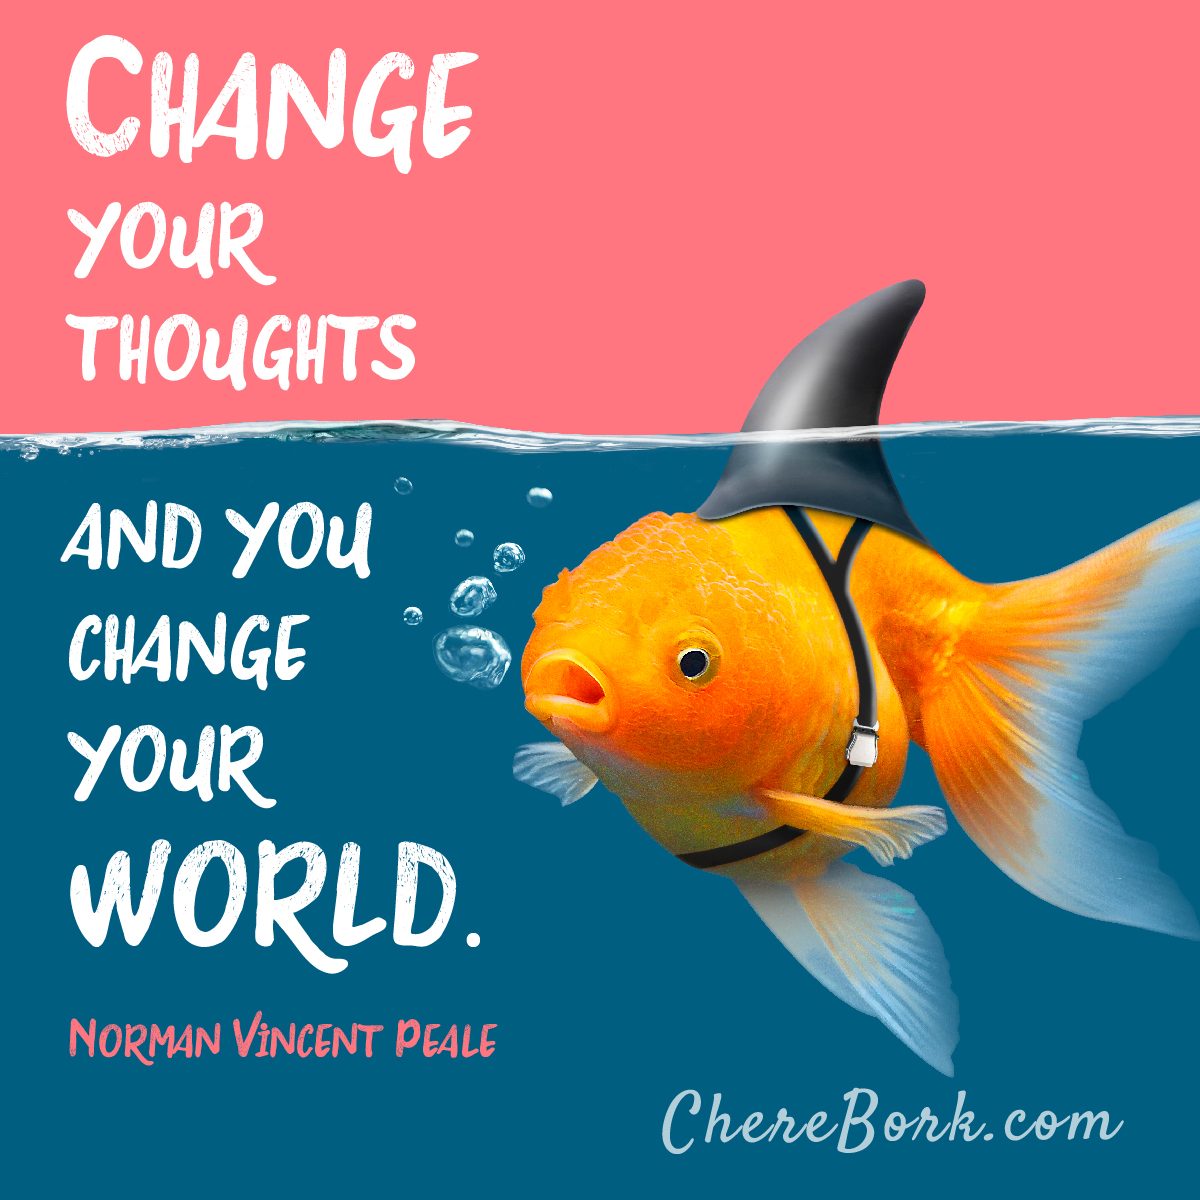 Change your thoughts and change your world. -Norman Vincent Peale